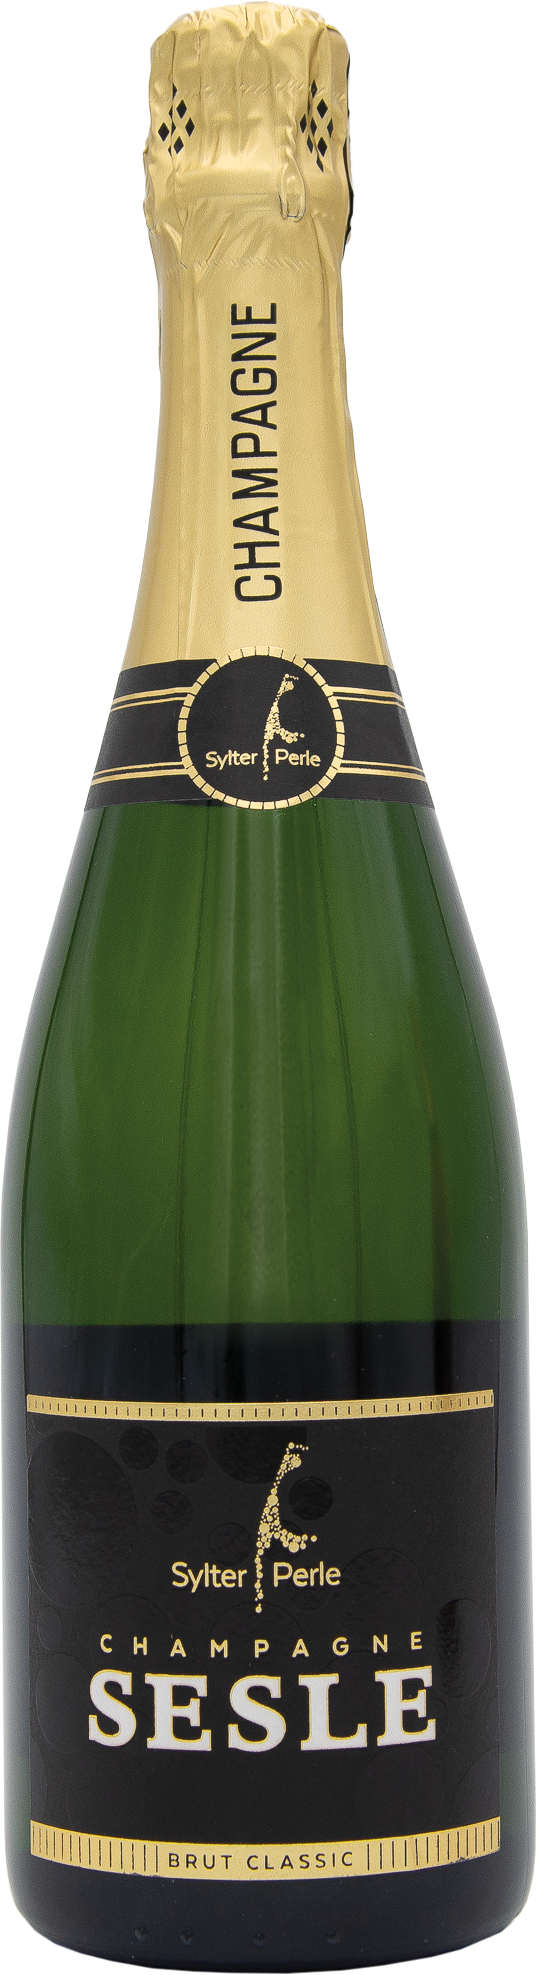 SESLE Champagne Brut by Sylter Perle